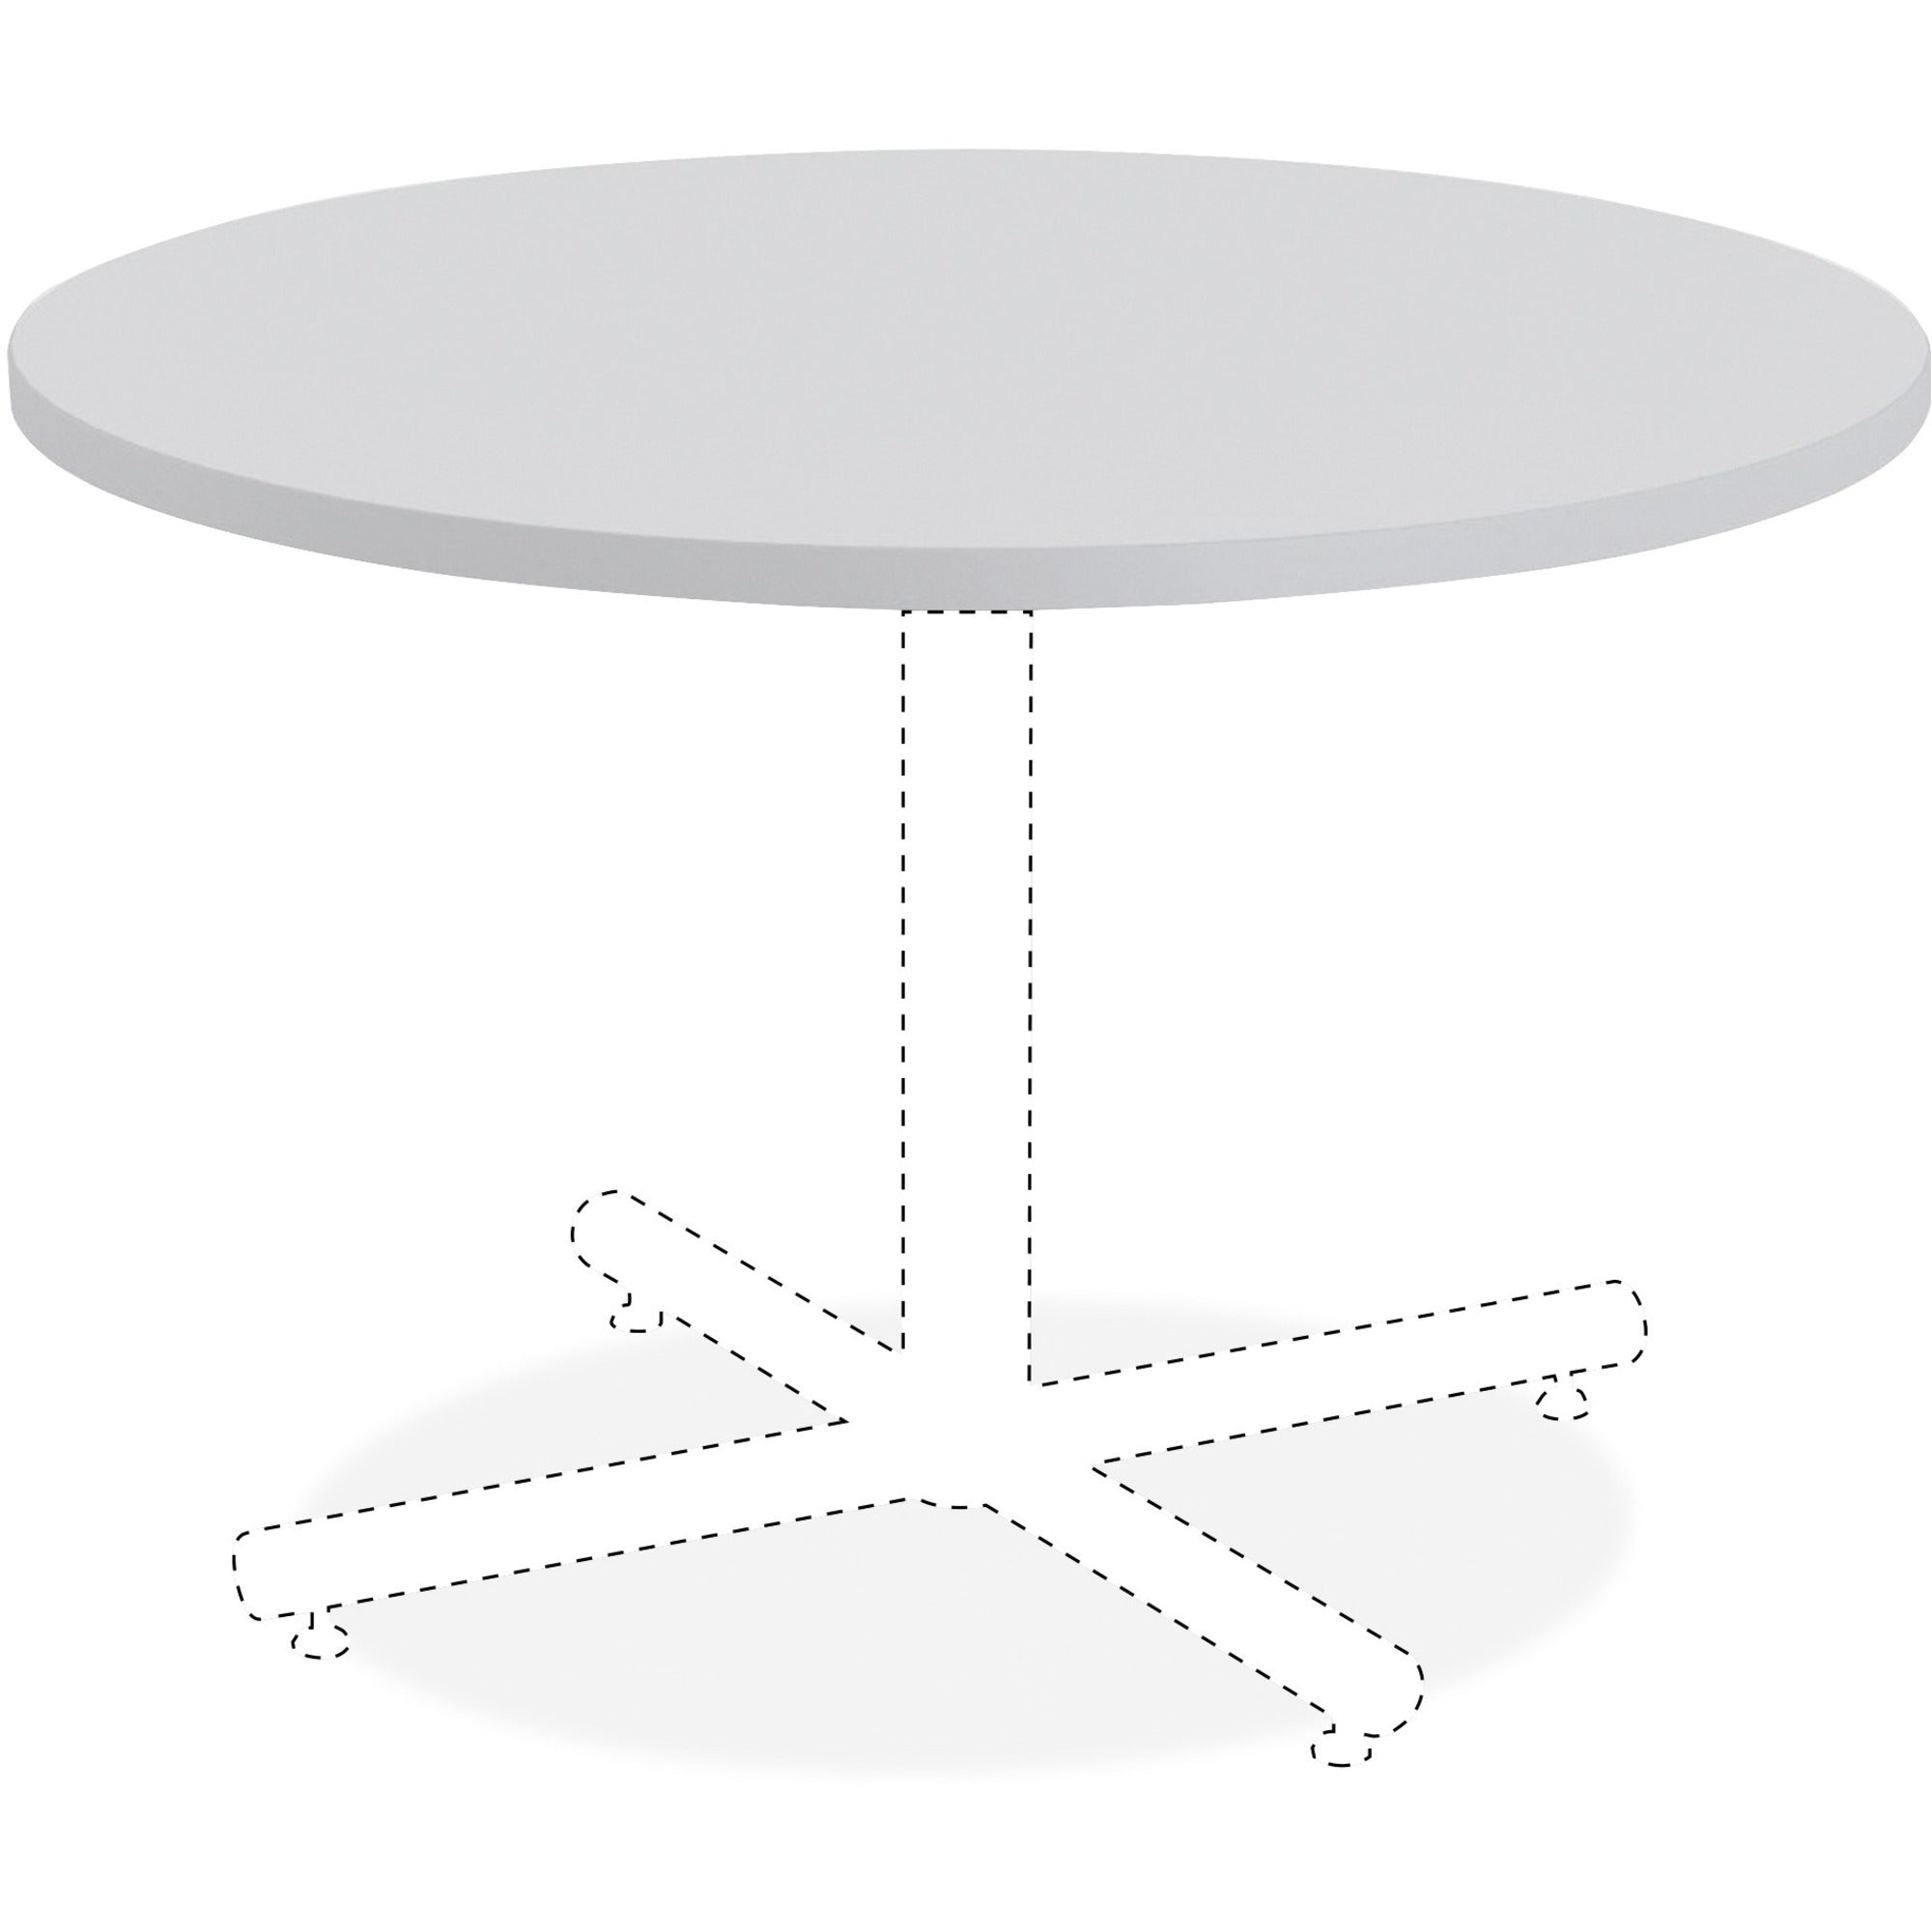 Lorell Hospitality Collection Tabletop - For - Table TopRound Top x 1" Table Top Thickness x 36" Table Top Diameter - Assembly Required - High Pressure Laminate (HPL), Light Gray - Particleboard, Polyvinyl Chloride (PVC) - 1 Each - 